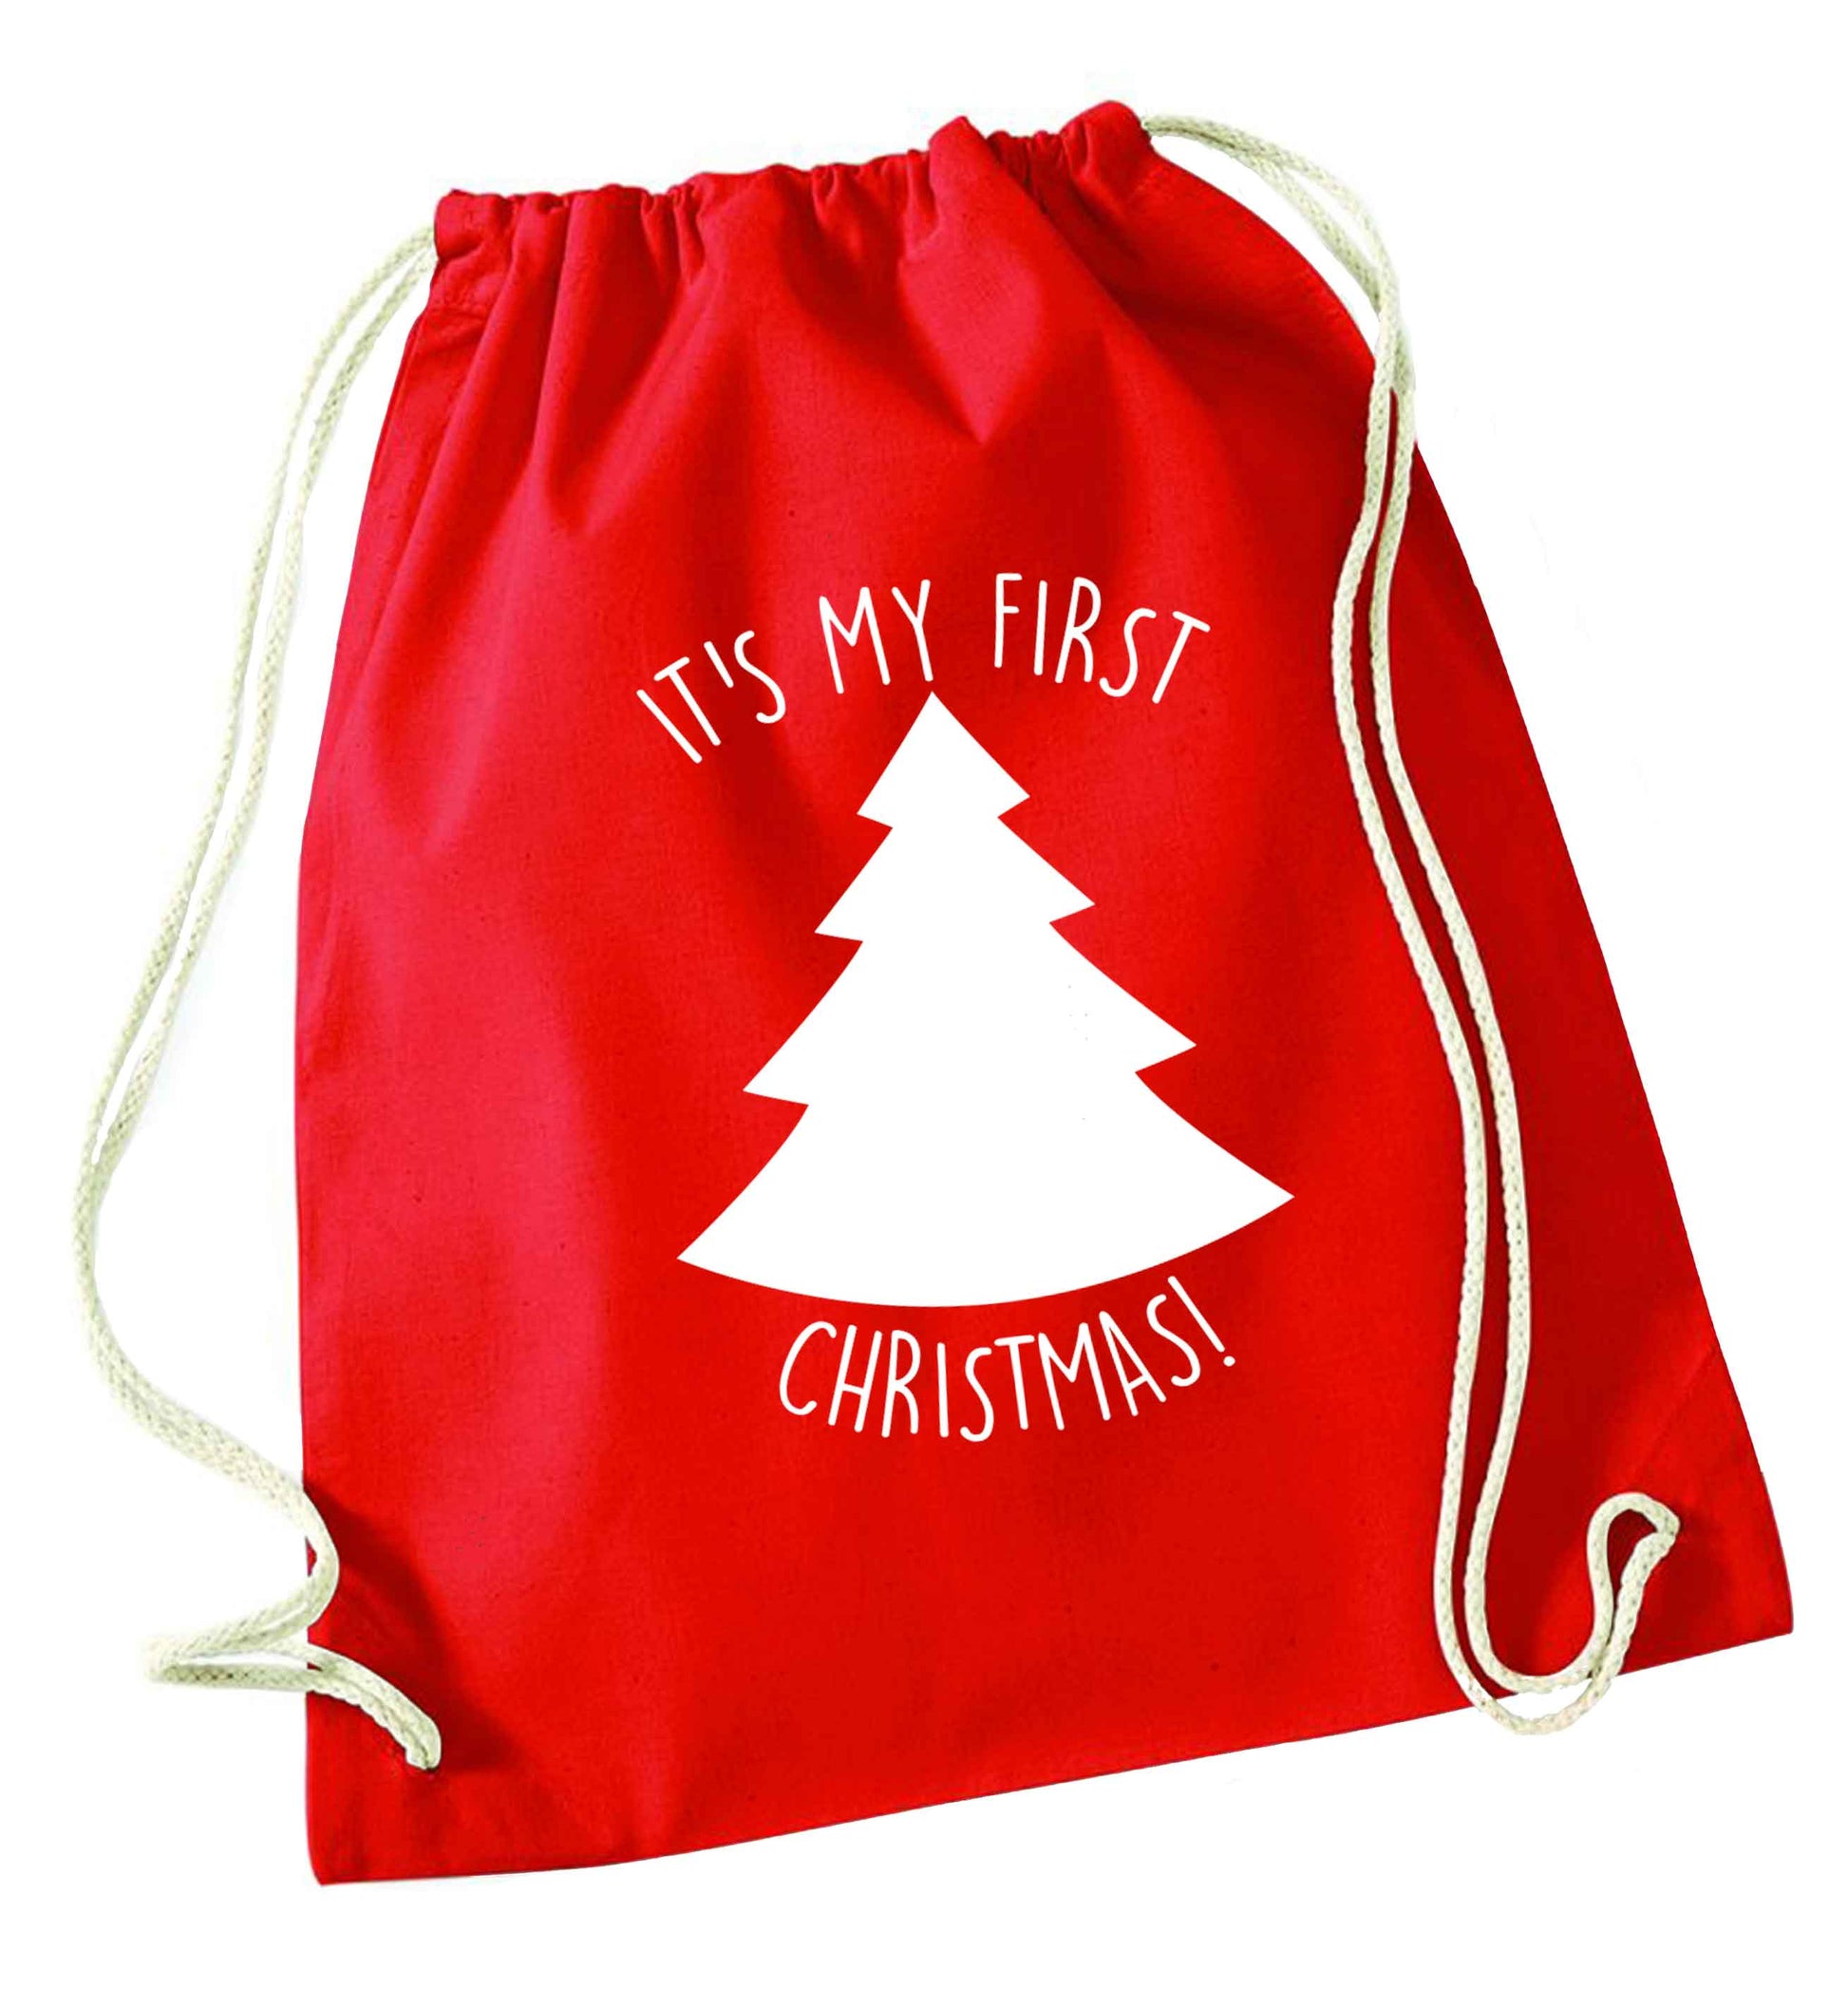 It's my first Christmas - tree red drawstring bag 